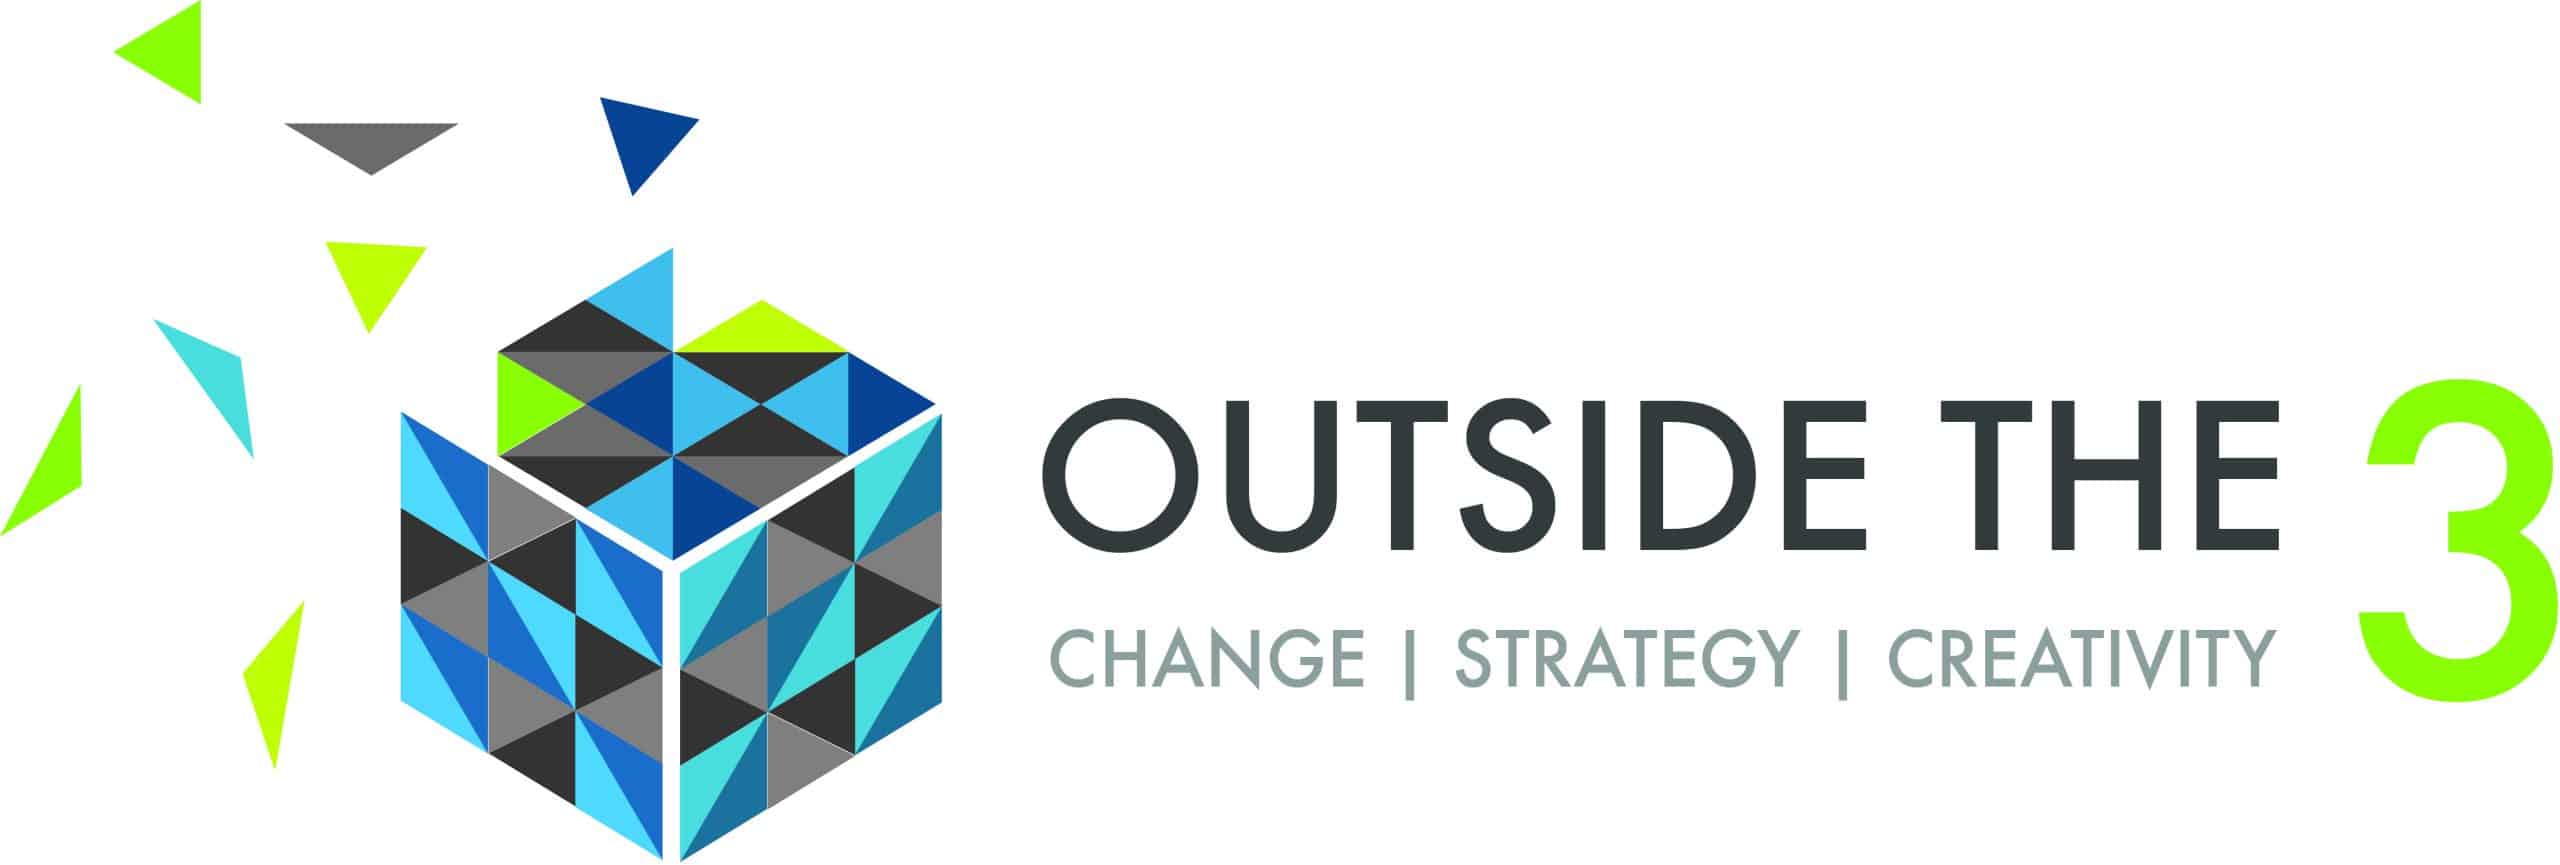 Creative Change Management - Outside the 3